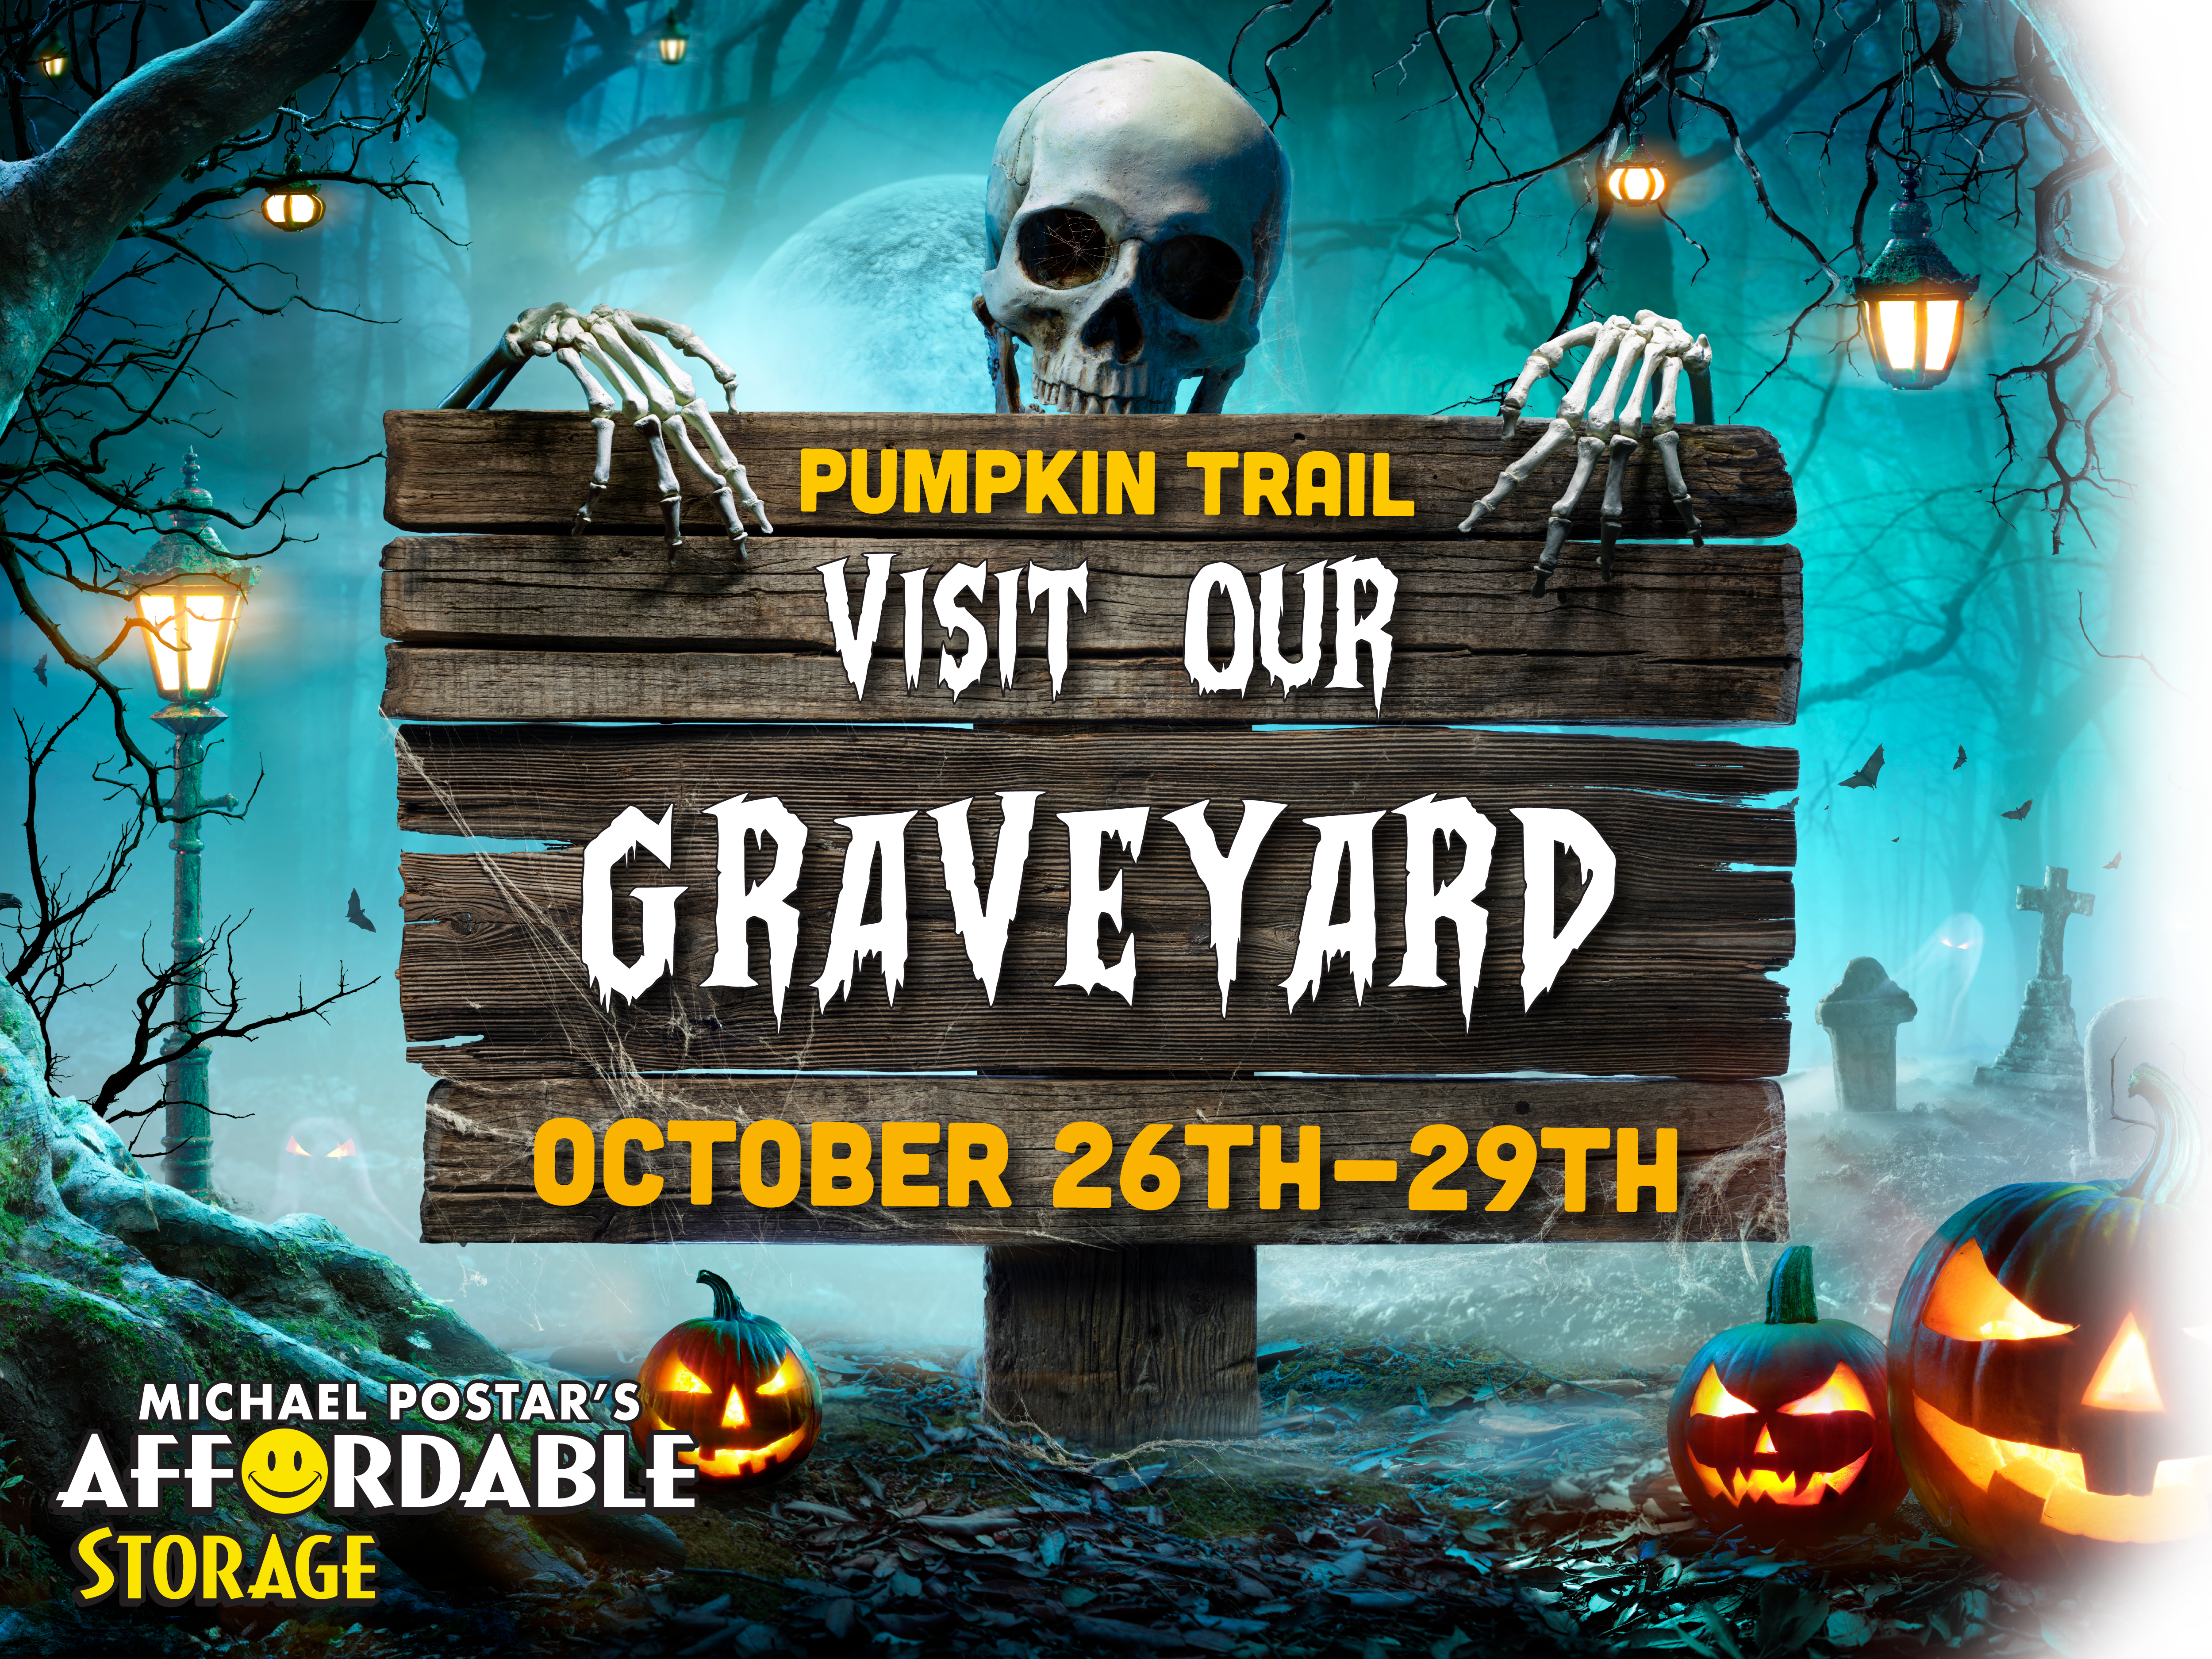 15th Annual Pumpkin Trail Sponsored by Affordable Storage